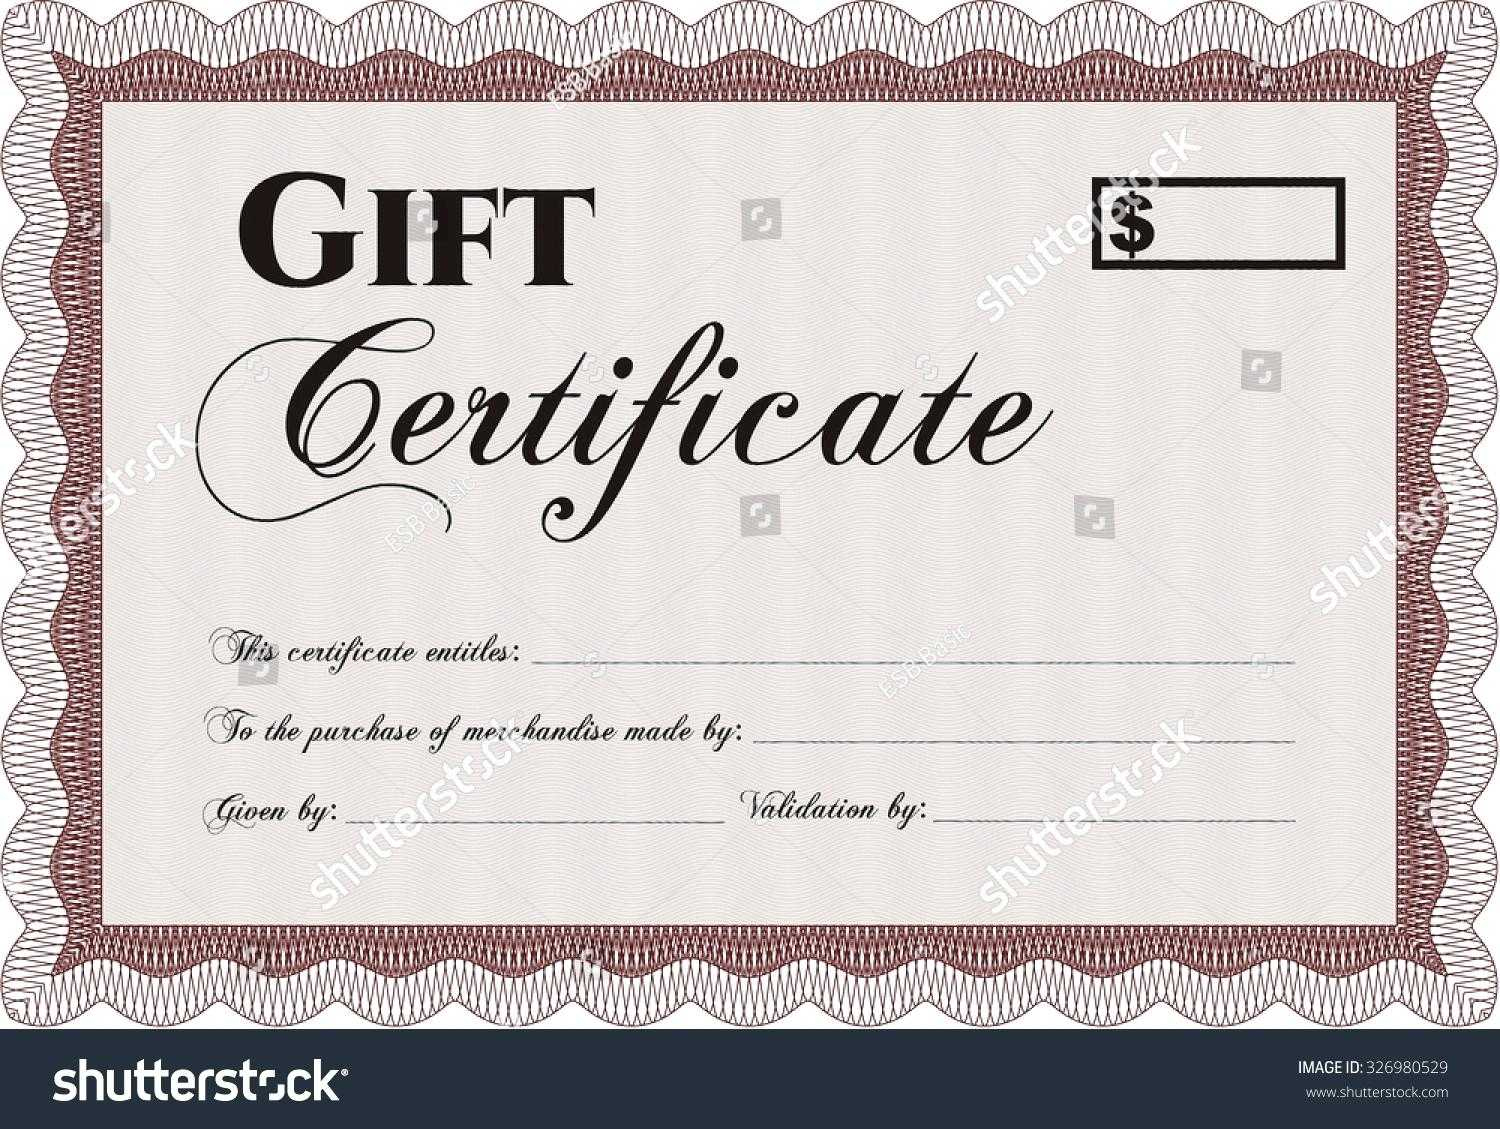 This Certificate Entitles The Bearer To Template - Best Template Ideas inside This Certificate Entitles The Bearer To Template